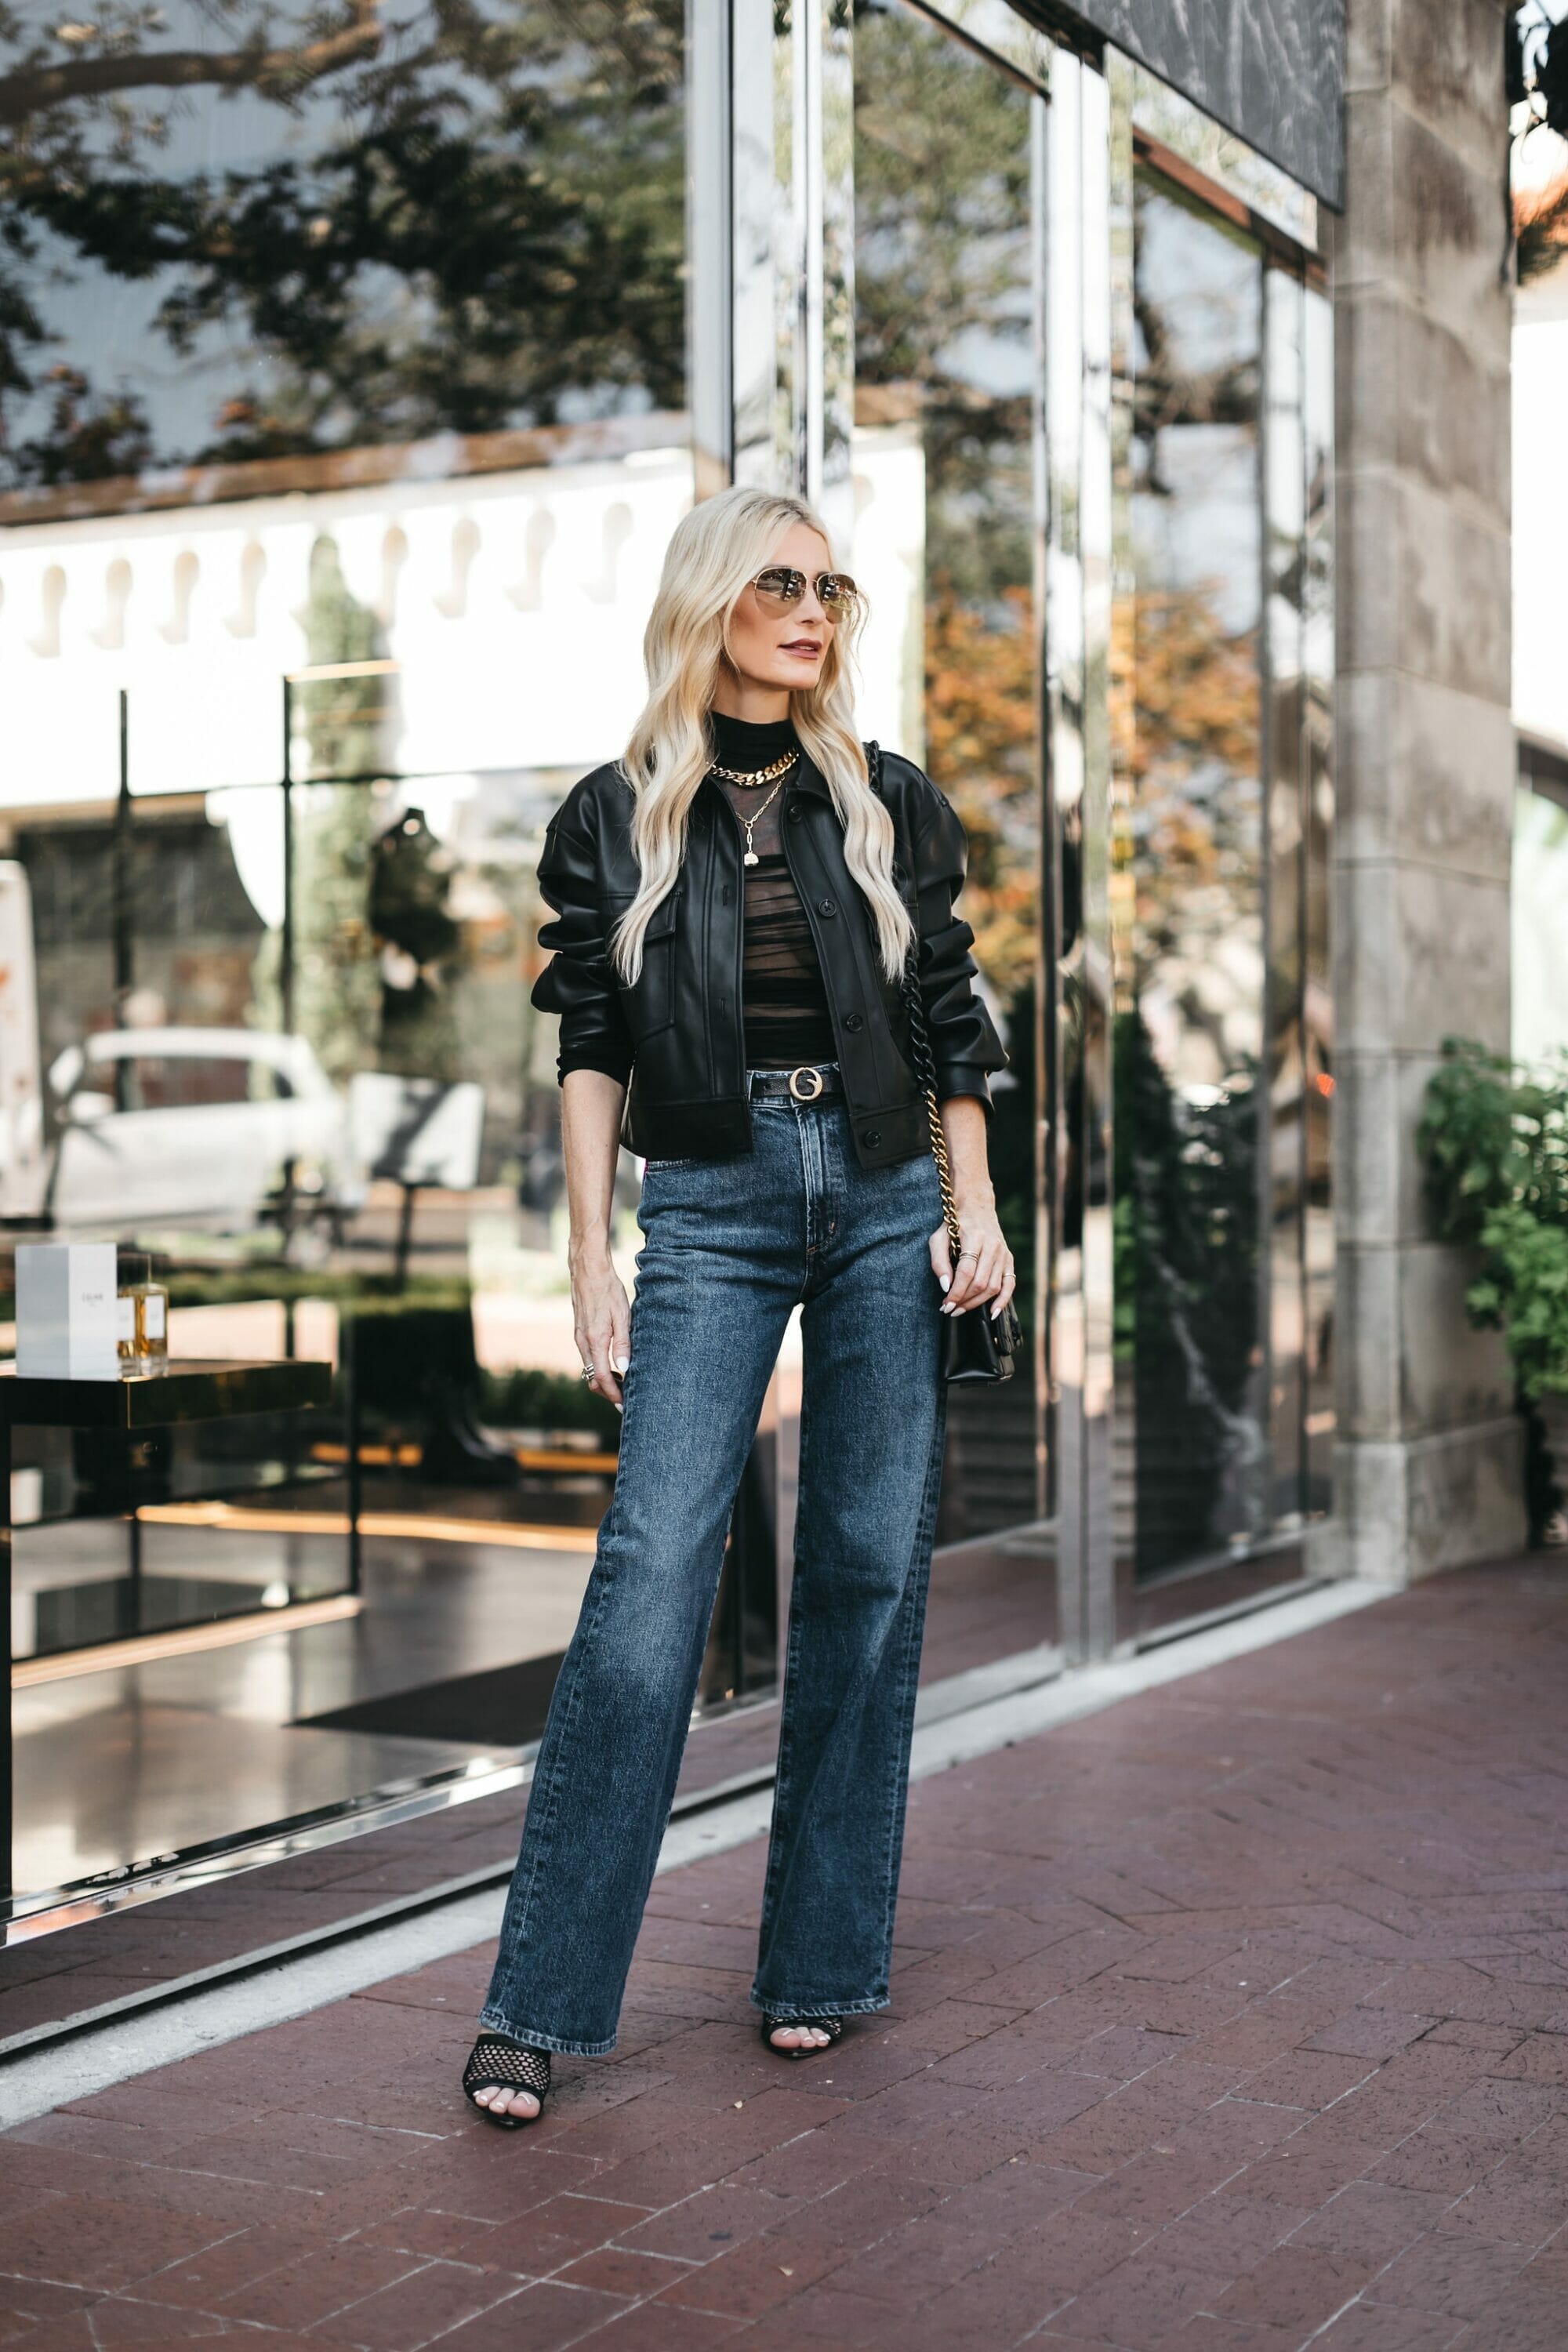 Corset Top for Fall  Winter fashion outfits, Perfect fall outfit, Dallas  fashion blogger